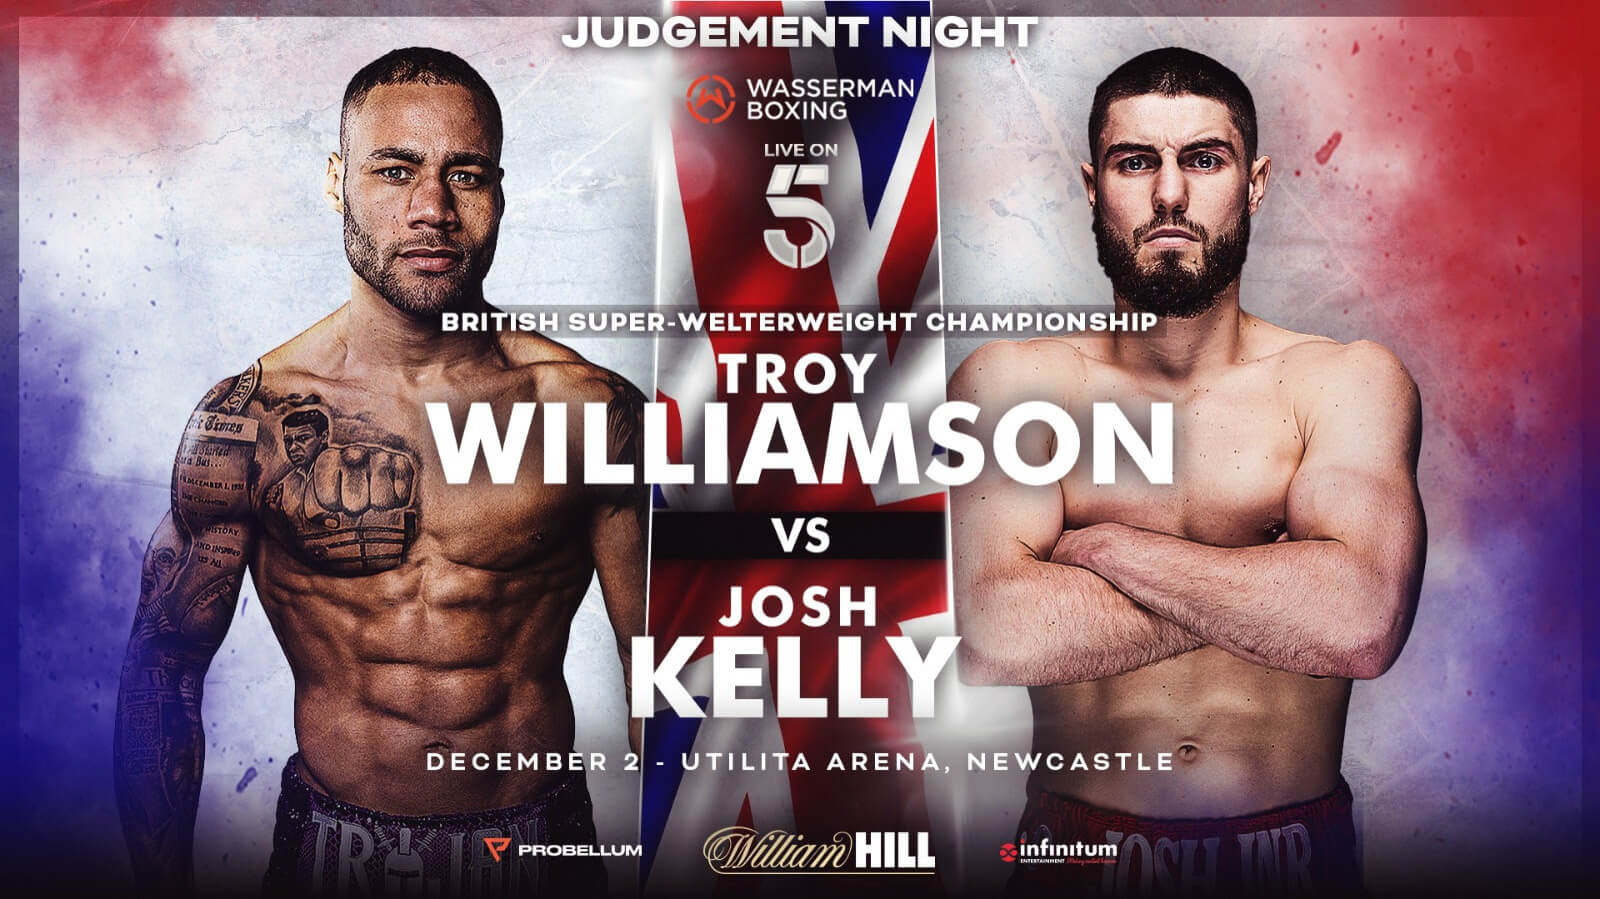 WILLIAMSON AND KELLY FACE OFF IN NORTH EAST 'JUDGEMENT NIGHT' ON DECEMBER 2 IN NEWCASTLE